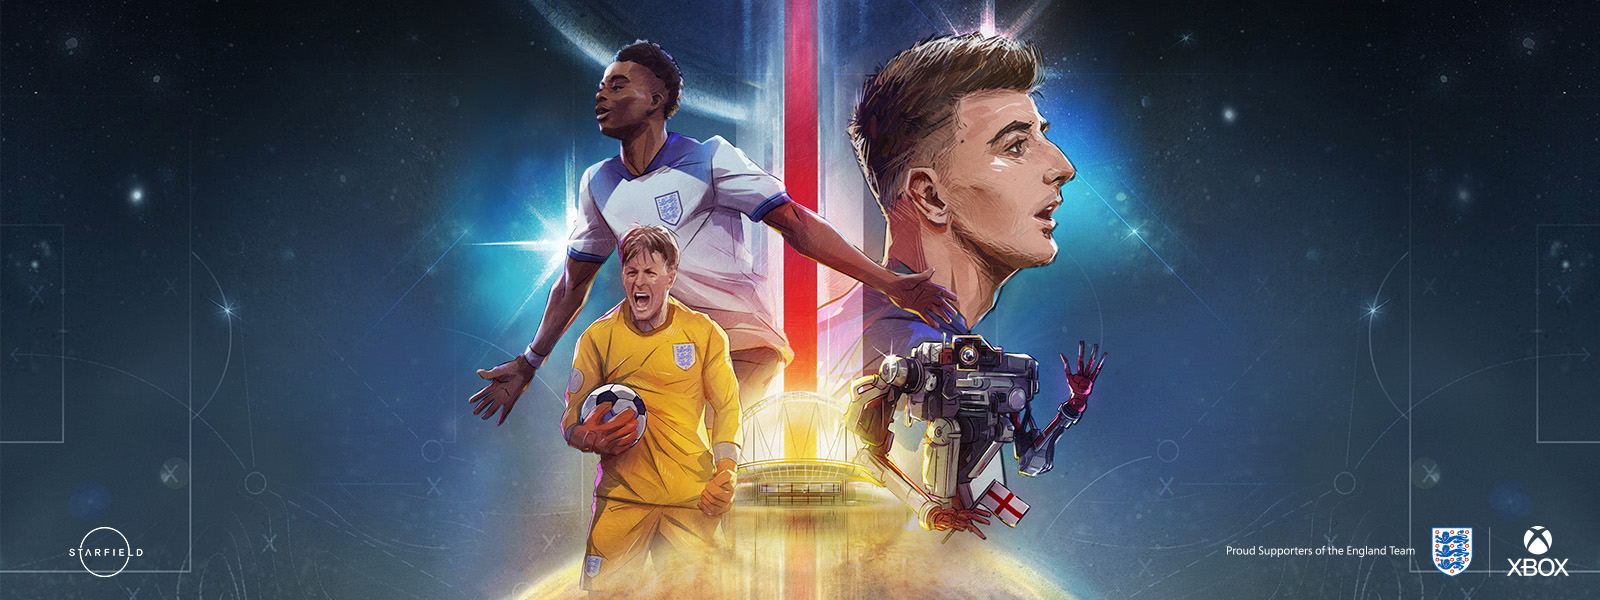 The Starfield key visual, with the characters replaced as illustrated football players (along with a robot holding England's flag). The FA and Xbox logos can be seen on the bottom right of the image, and the Starfield logo, on the bottom left